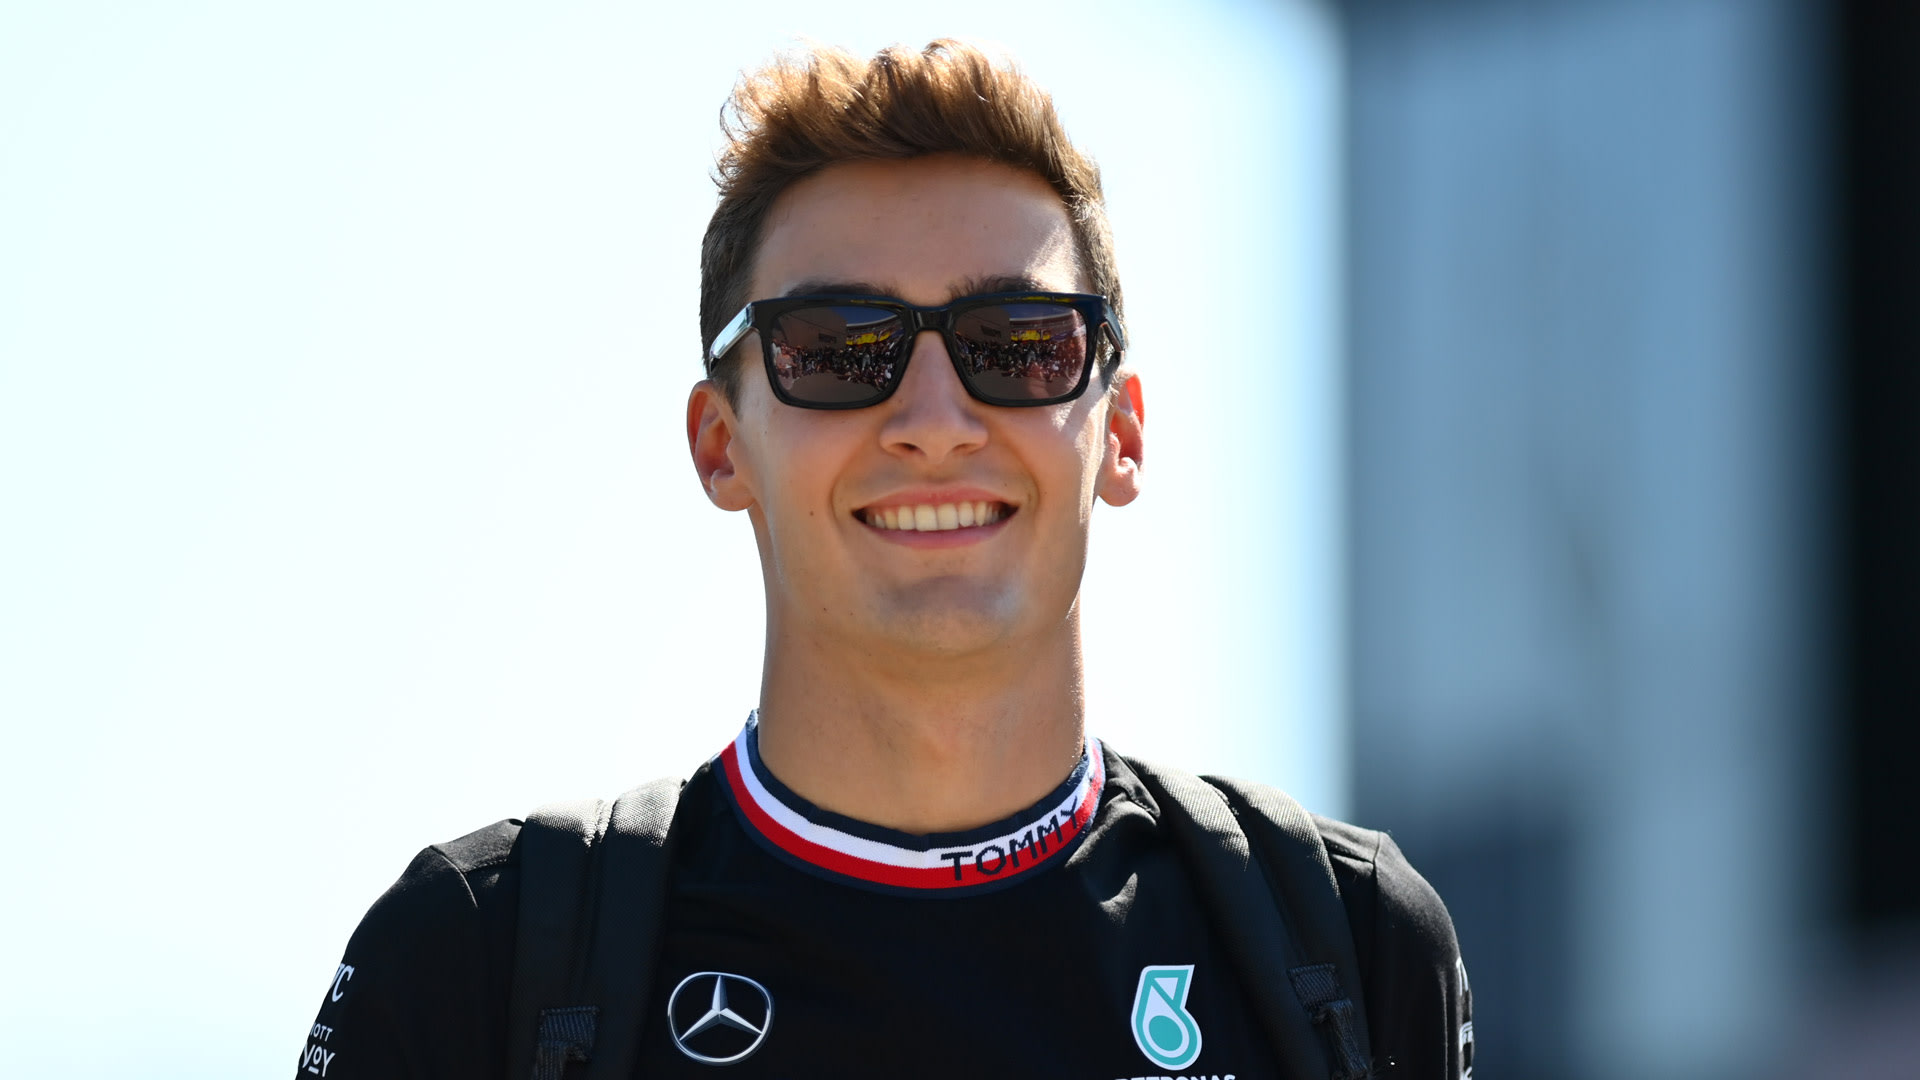 Russell sets his sights on Leclerc at the start as Hamilton approaches Italian GP with glass half full from P19 Formula 1®